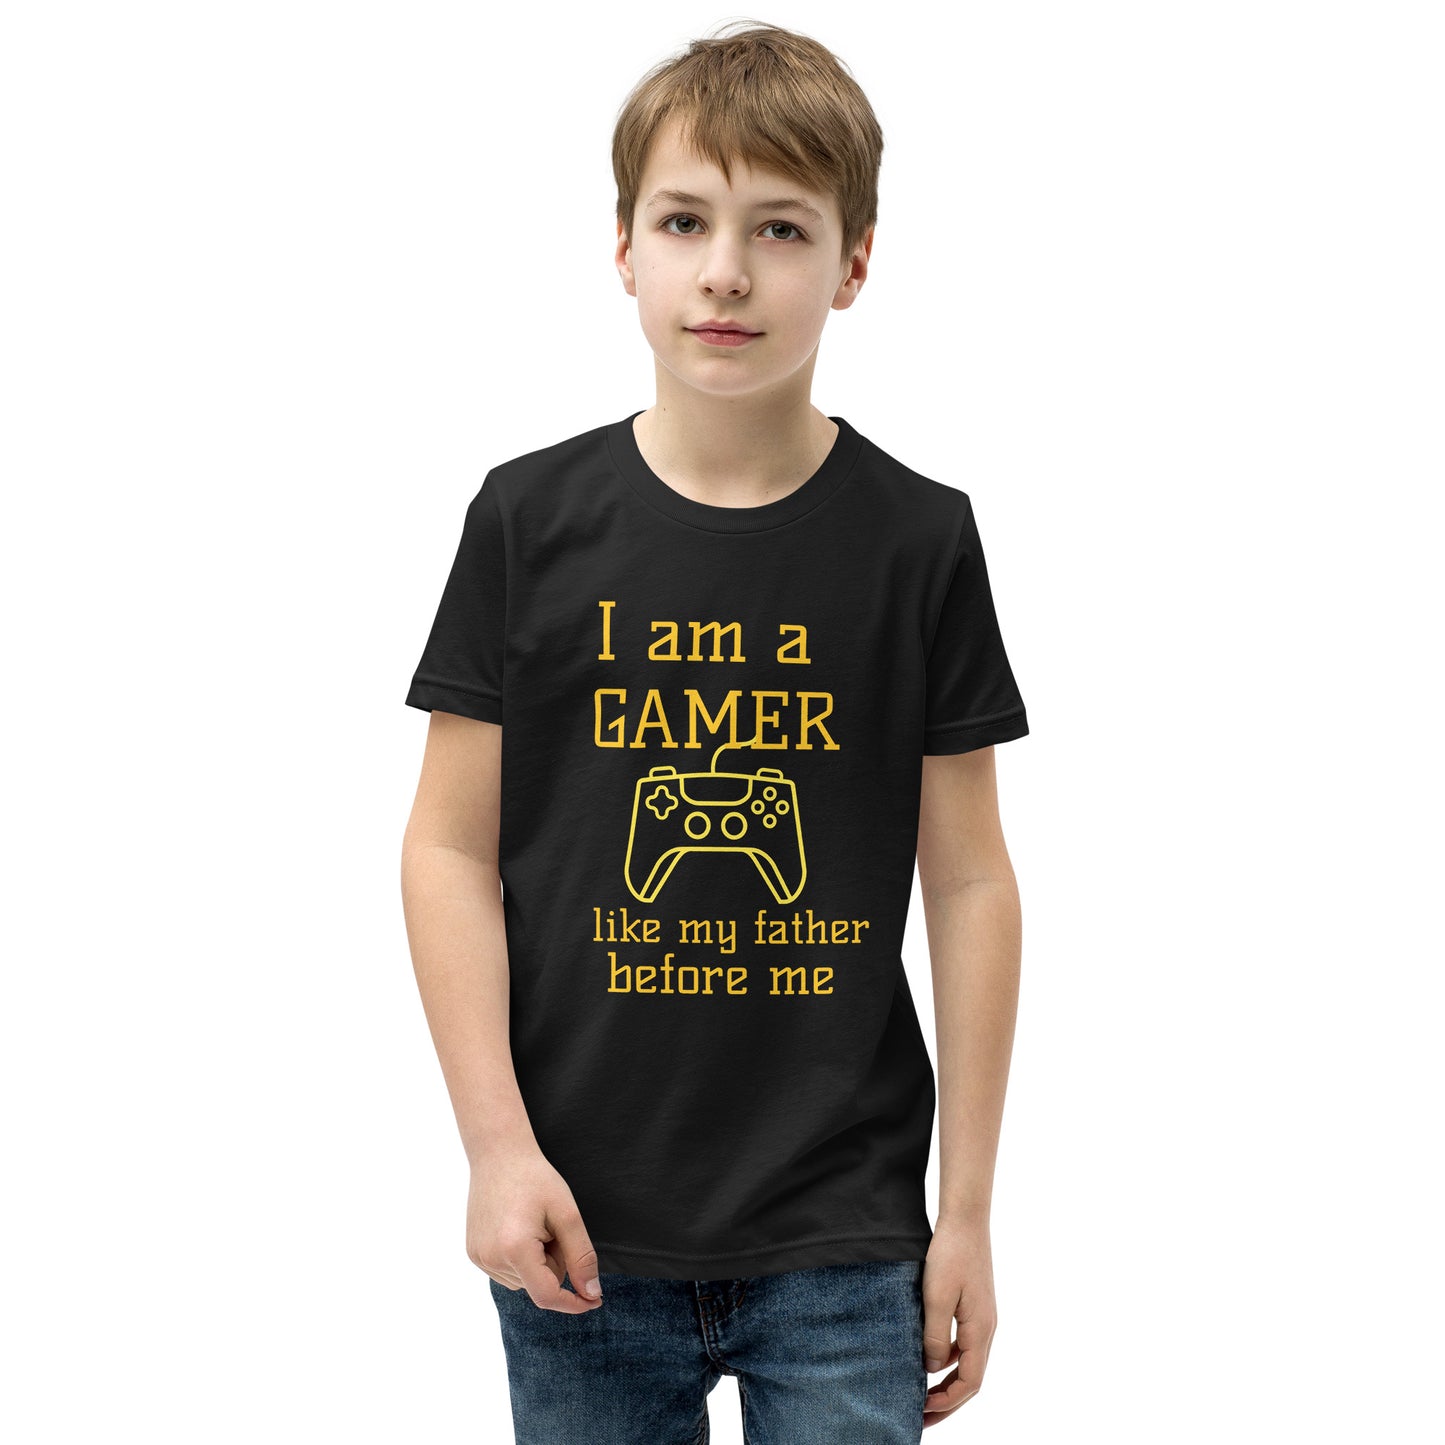 I Am a Gamer Like My Father Before Me - Youth Short Sleeve T-Shirt